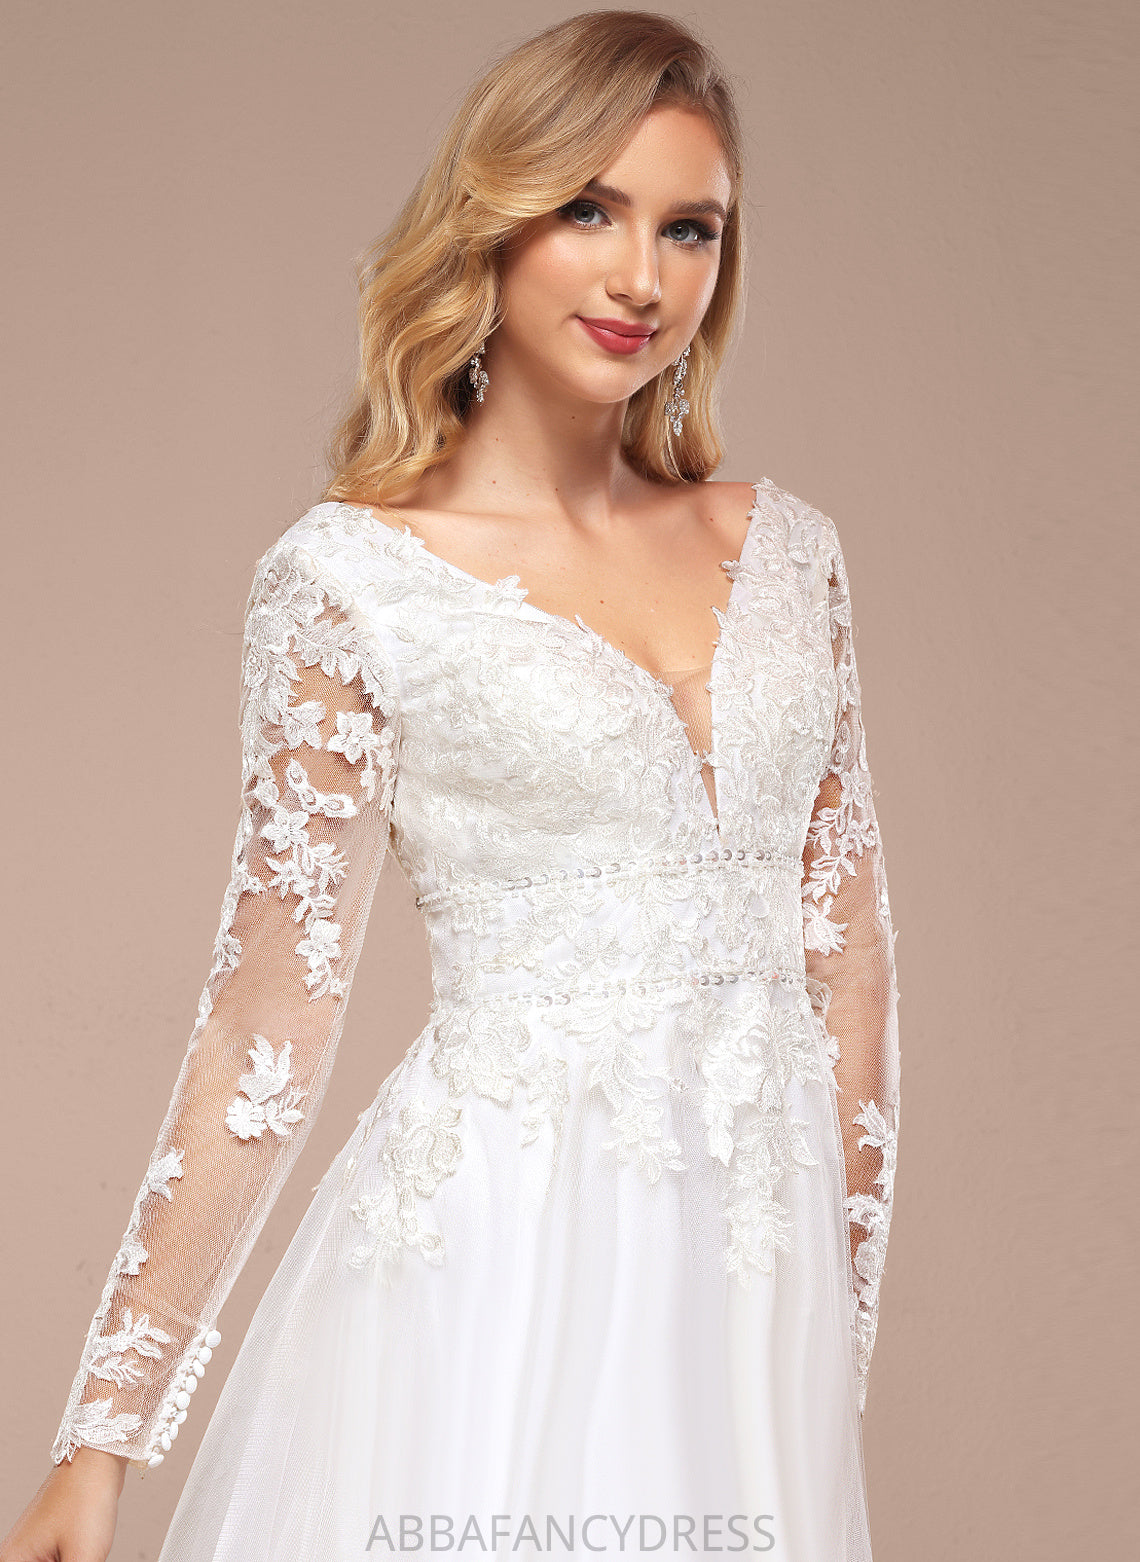 Wedding Dresses Wedding Tulle Floor-Length A-Line With Bethany Beading V-neck Lace Dress Sequins